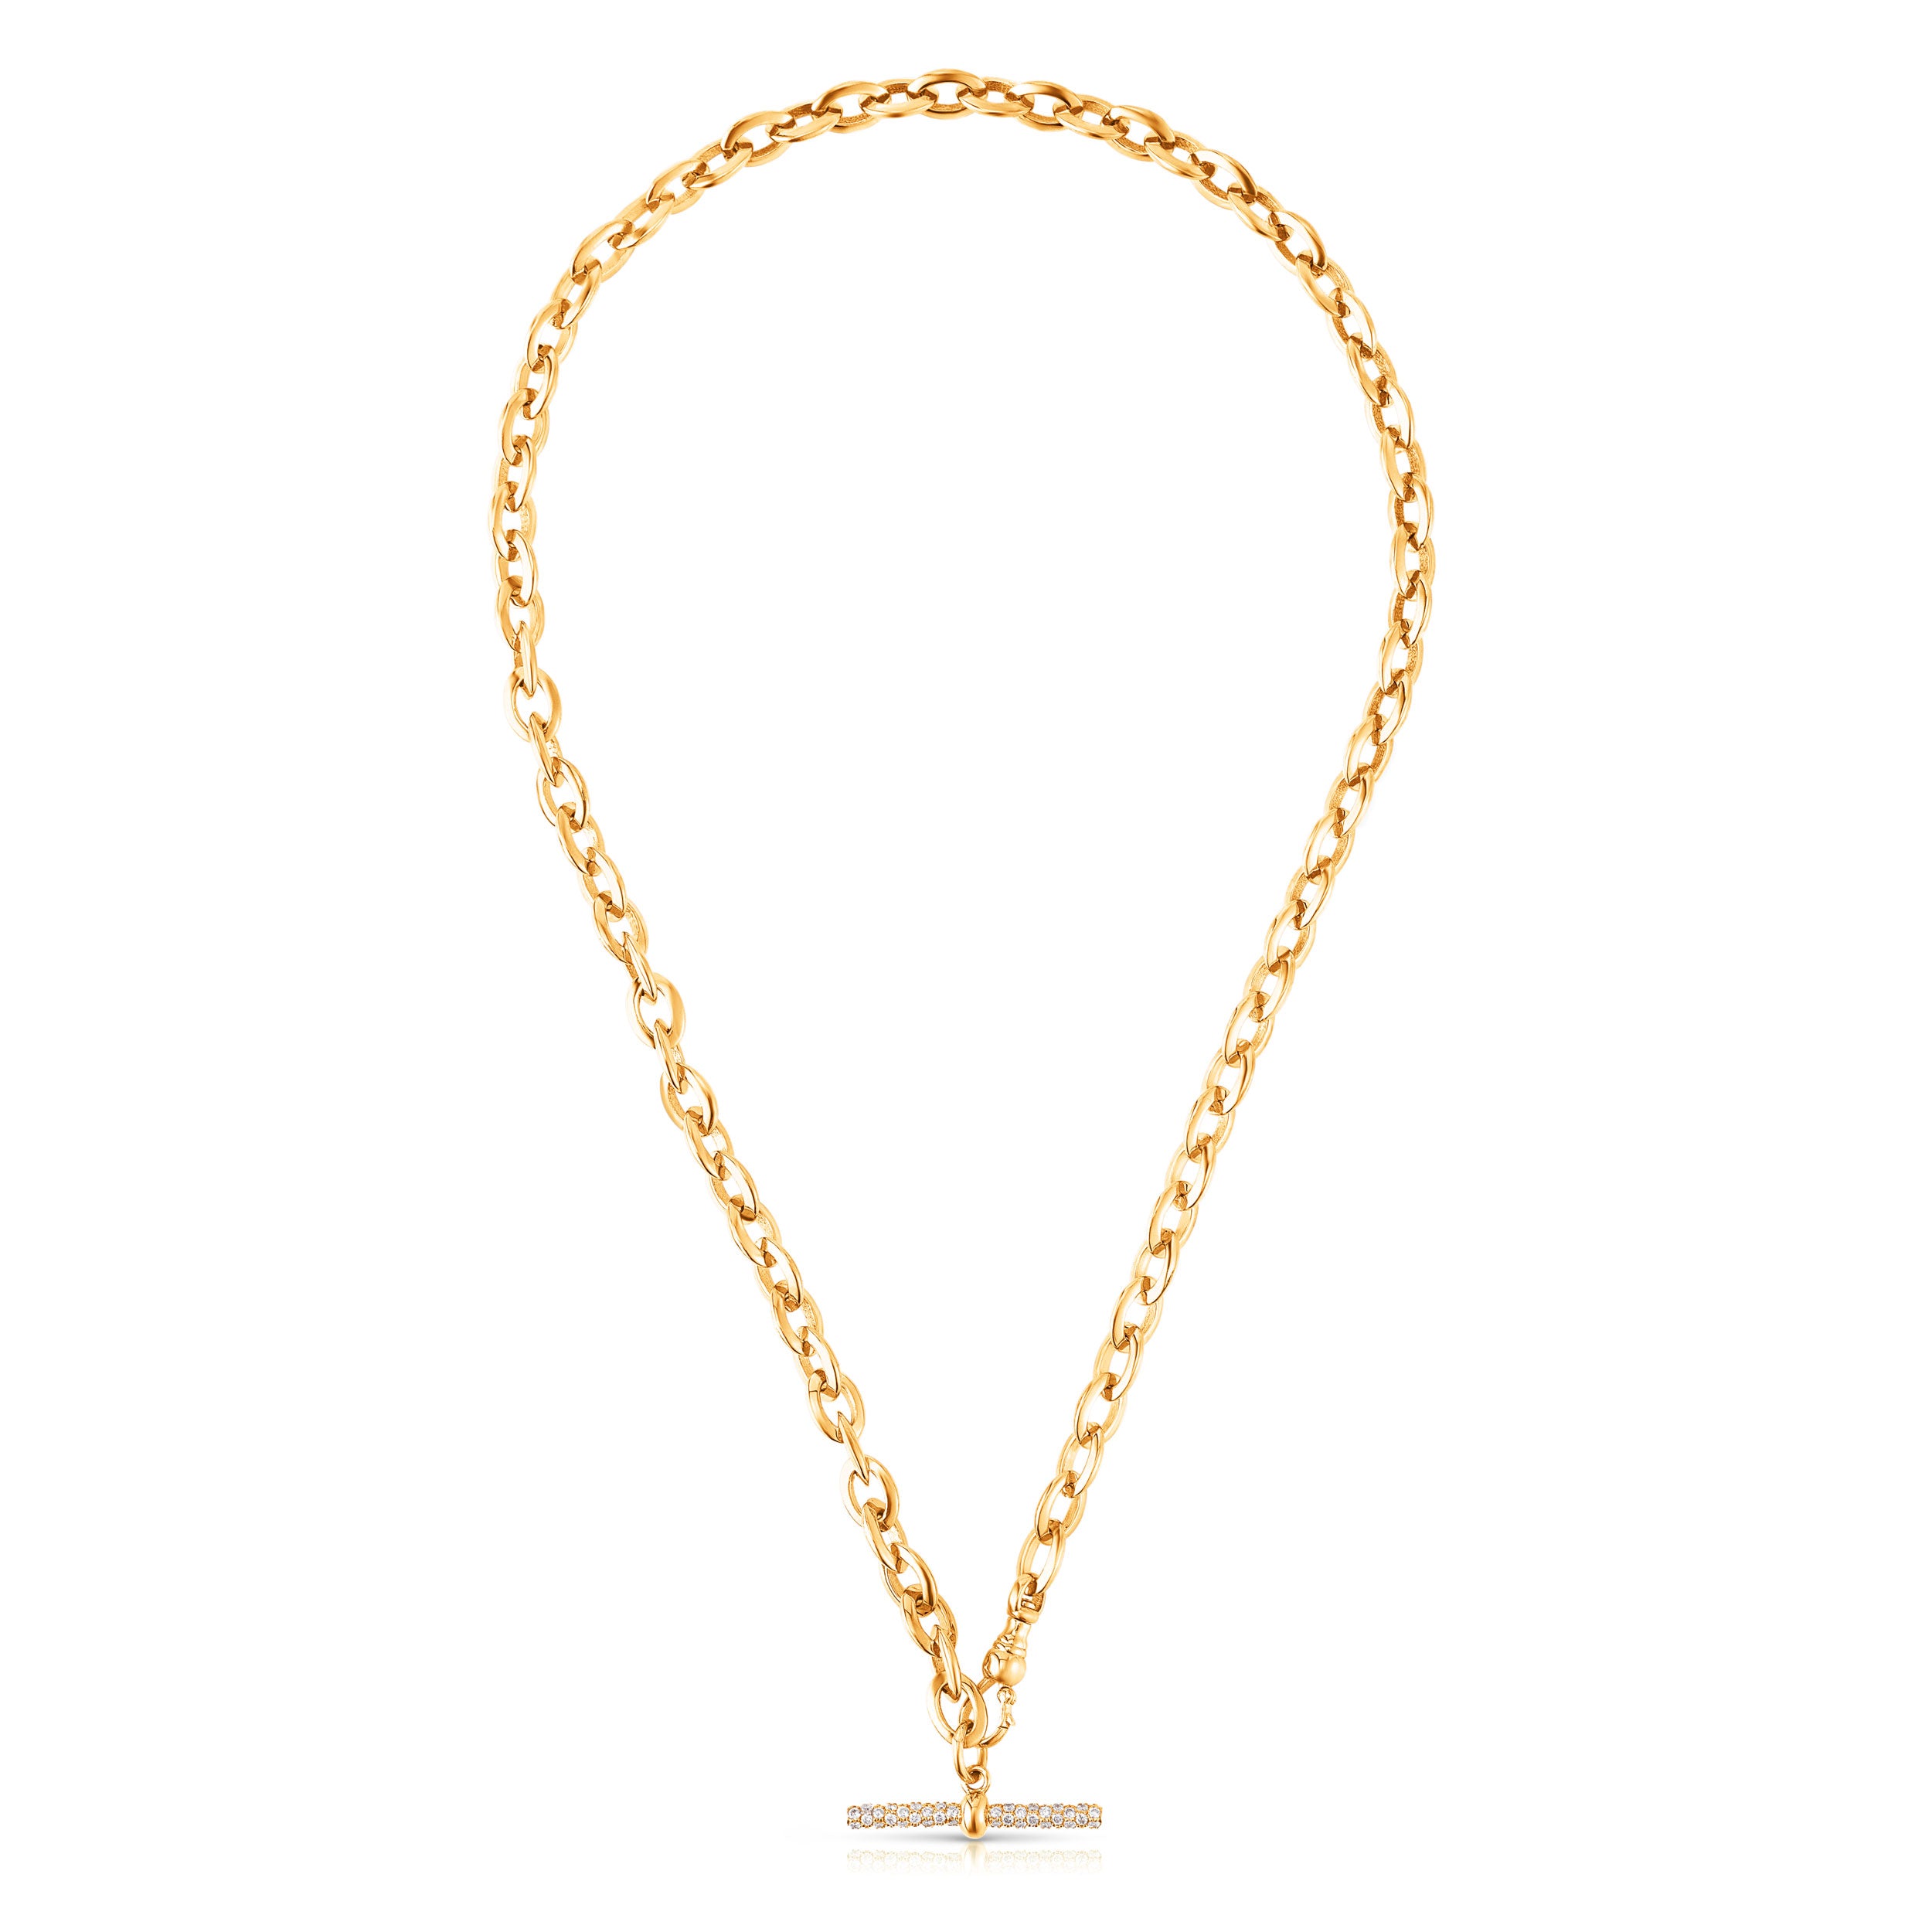  Pantheon Necklace in Yellow Gold